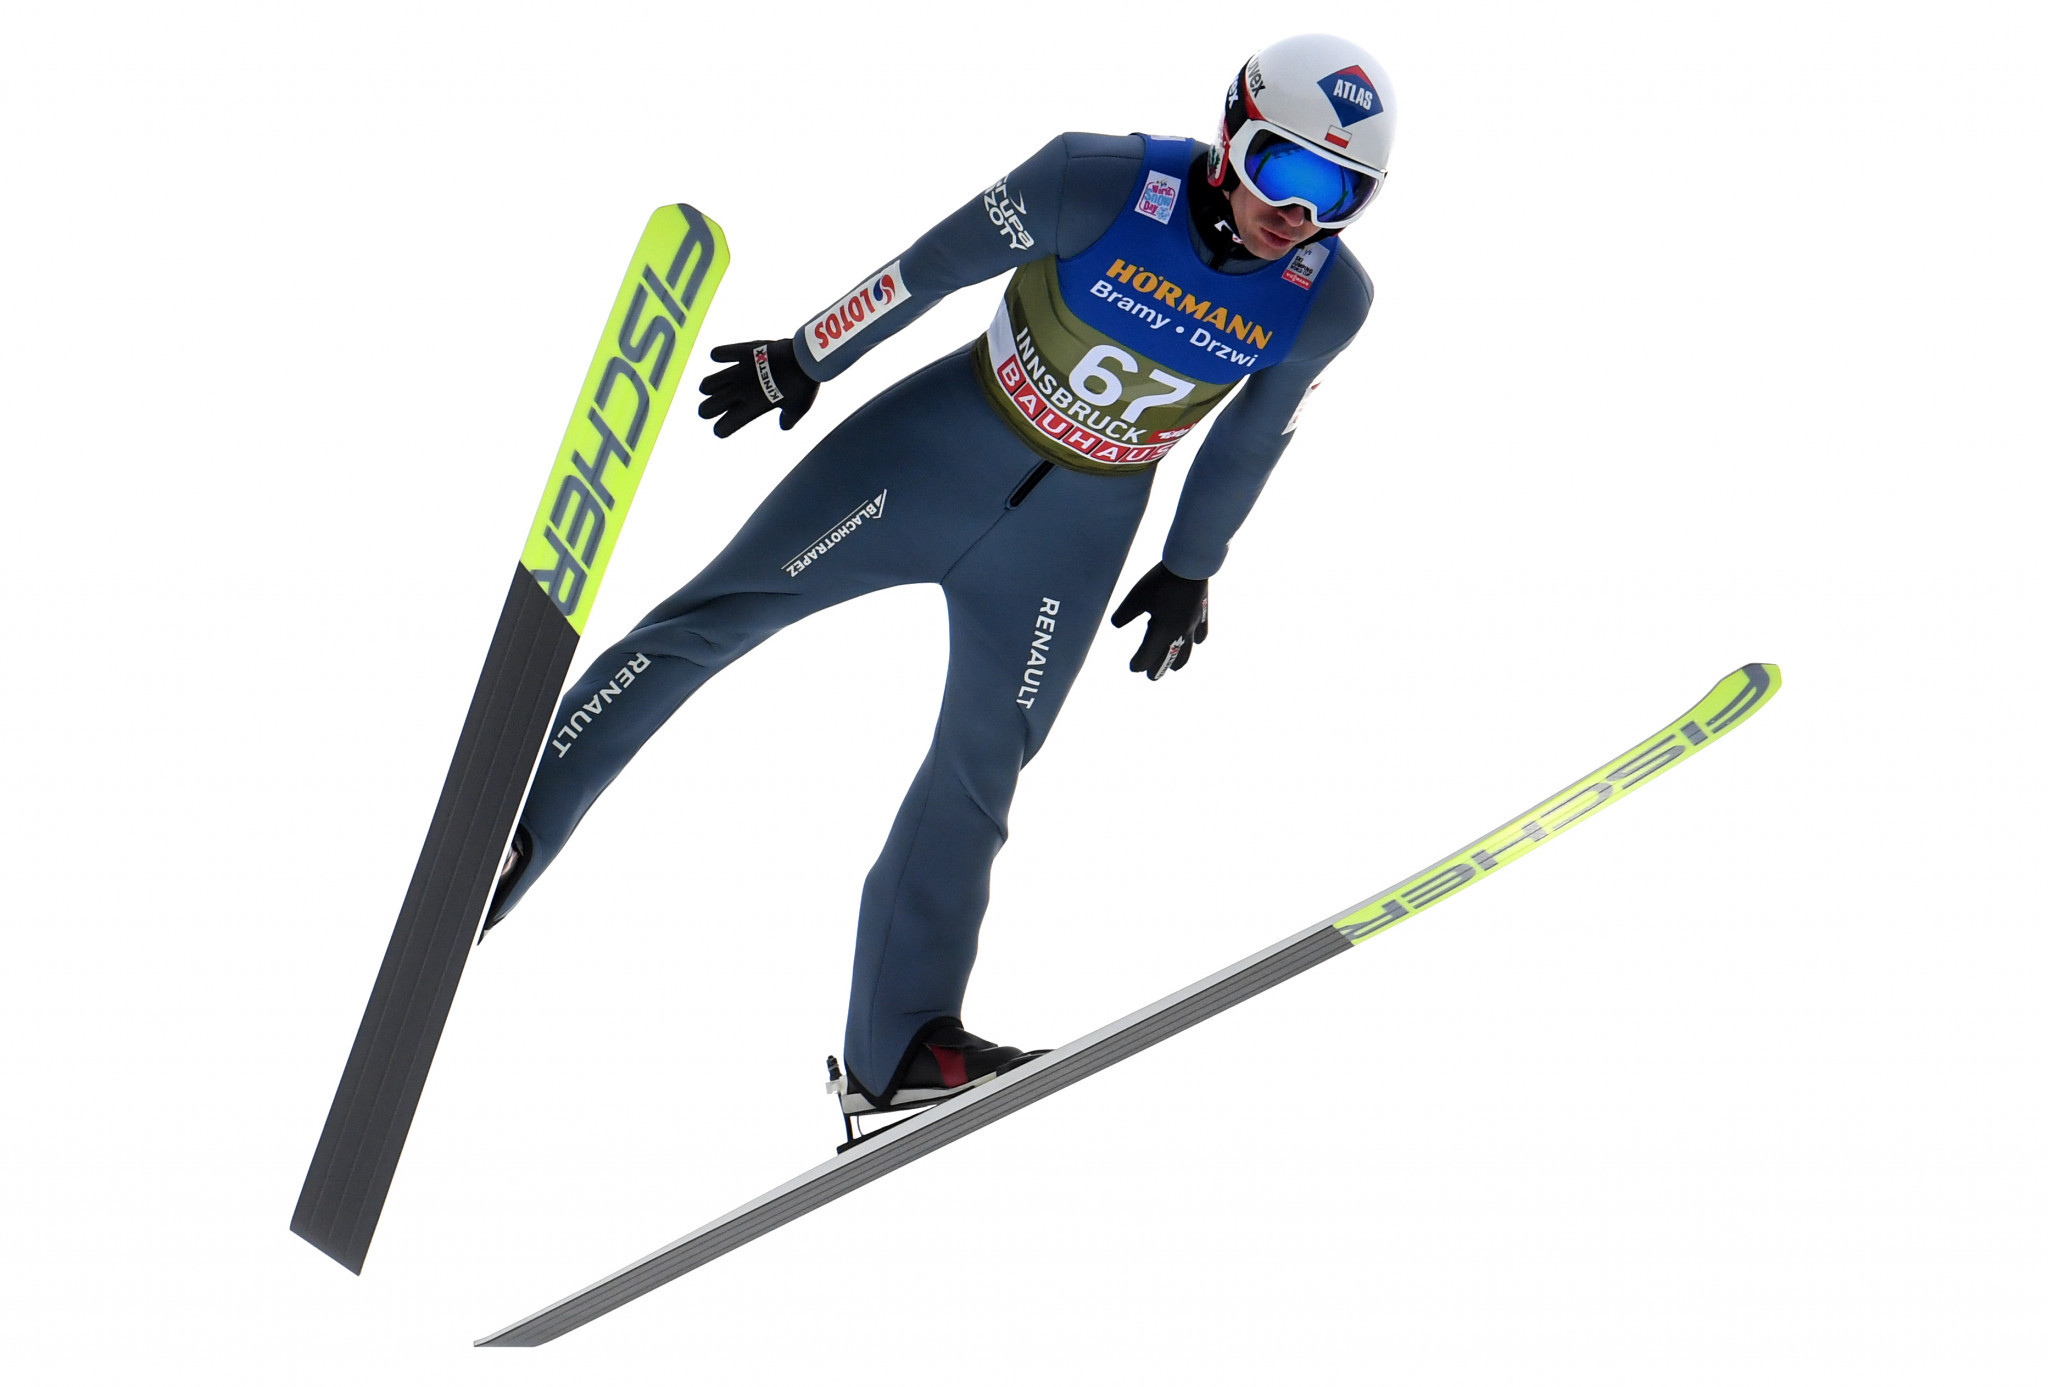 Stoch enjoys resurgence in front of home crowd at FIS Ski Jumping World Cup